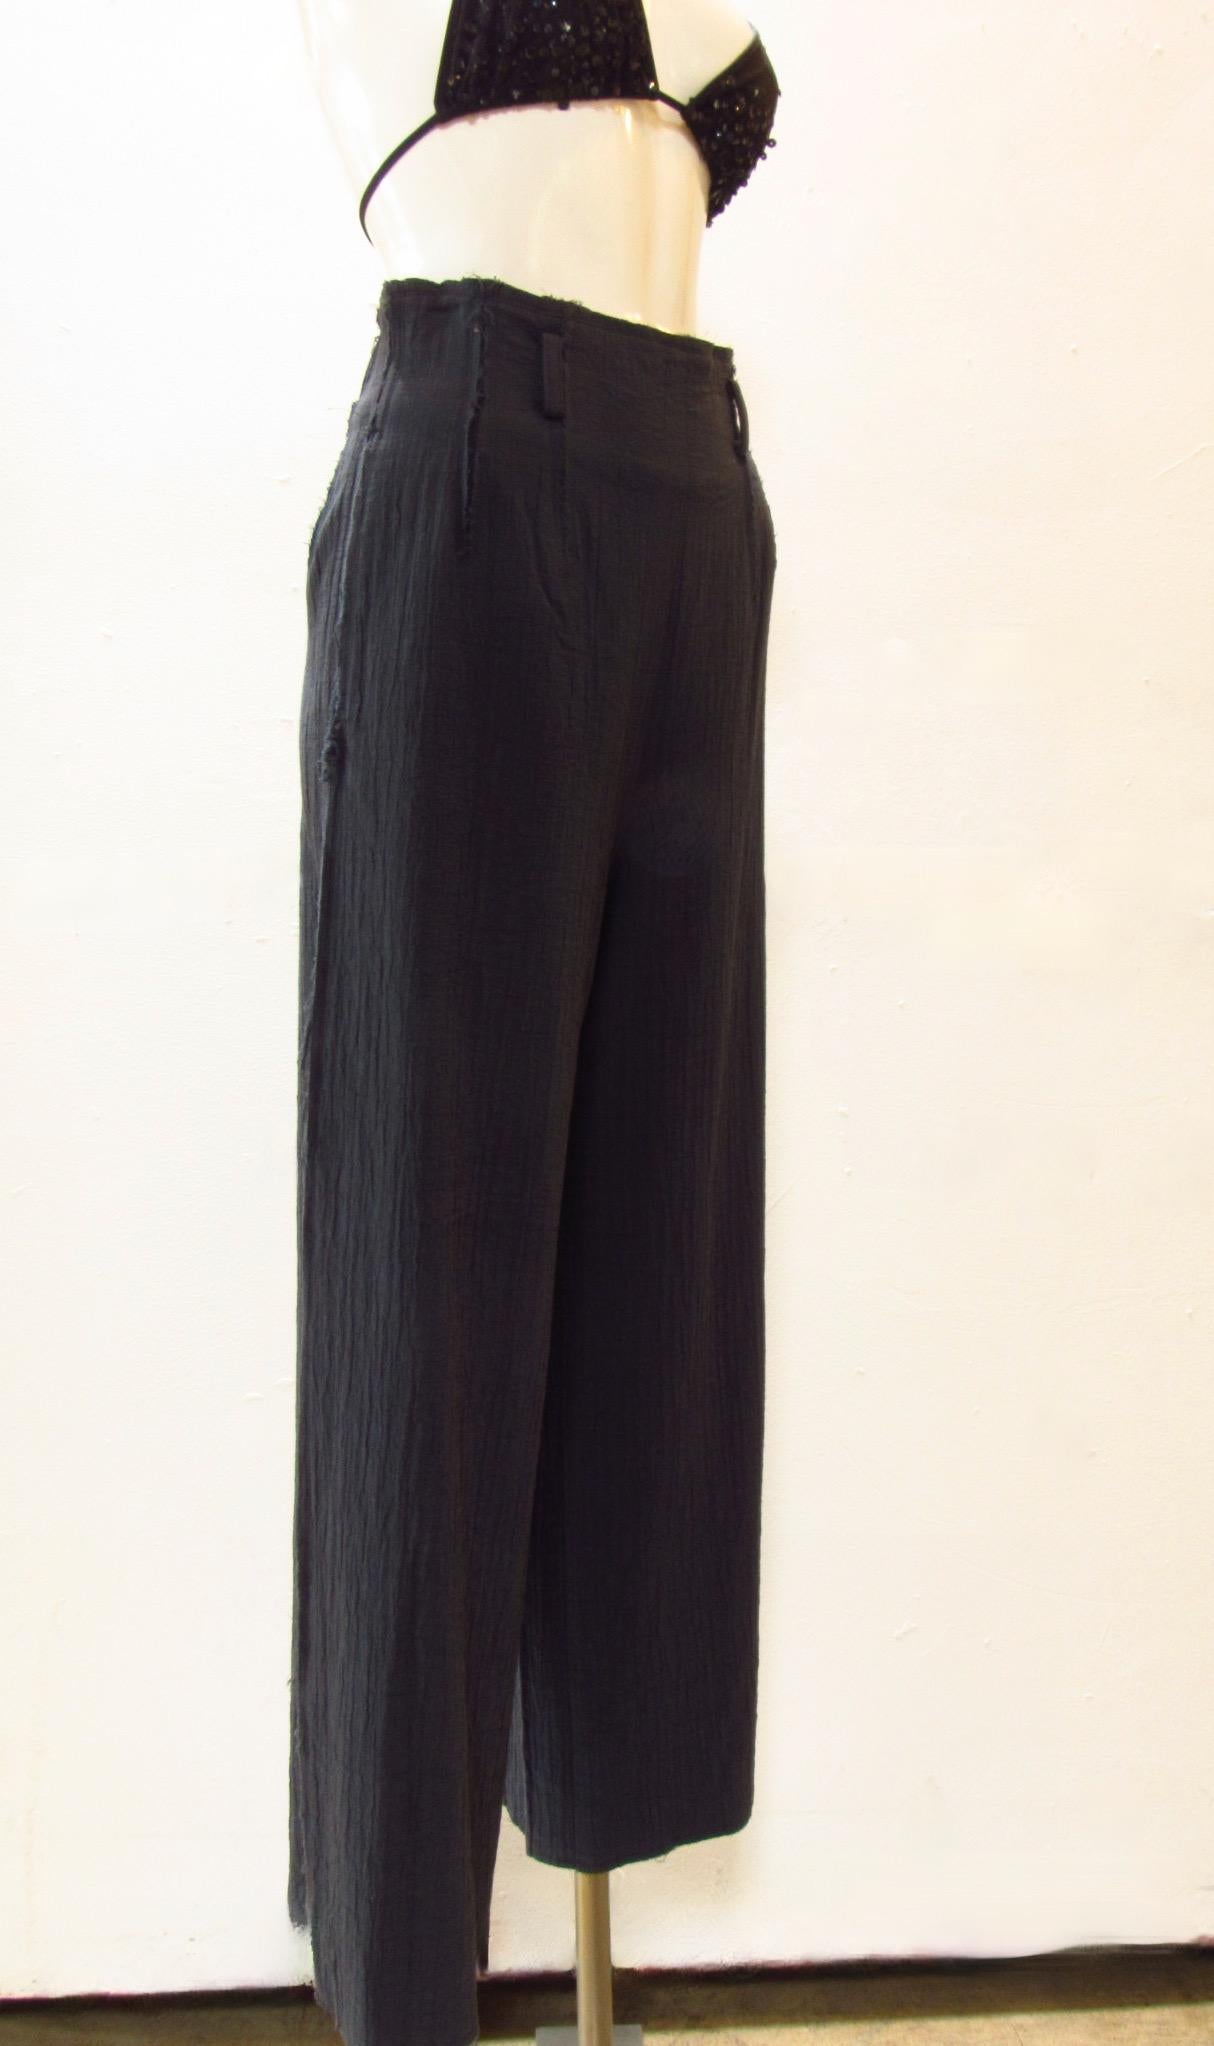 Thick cotton high-waisted pant from vintage Matsuda features back zip, belt loops and slanted side pockets. The seams are rough edged with exposed fraying.